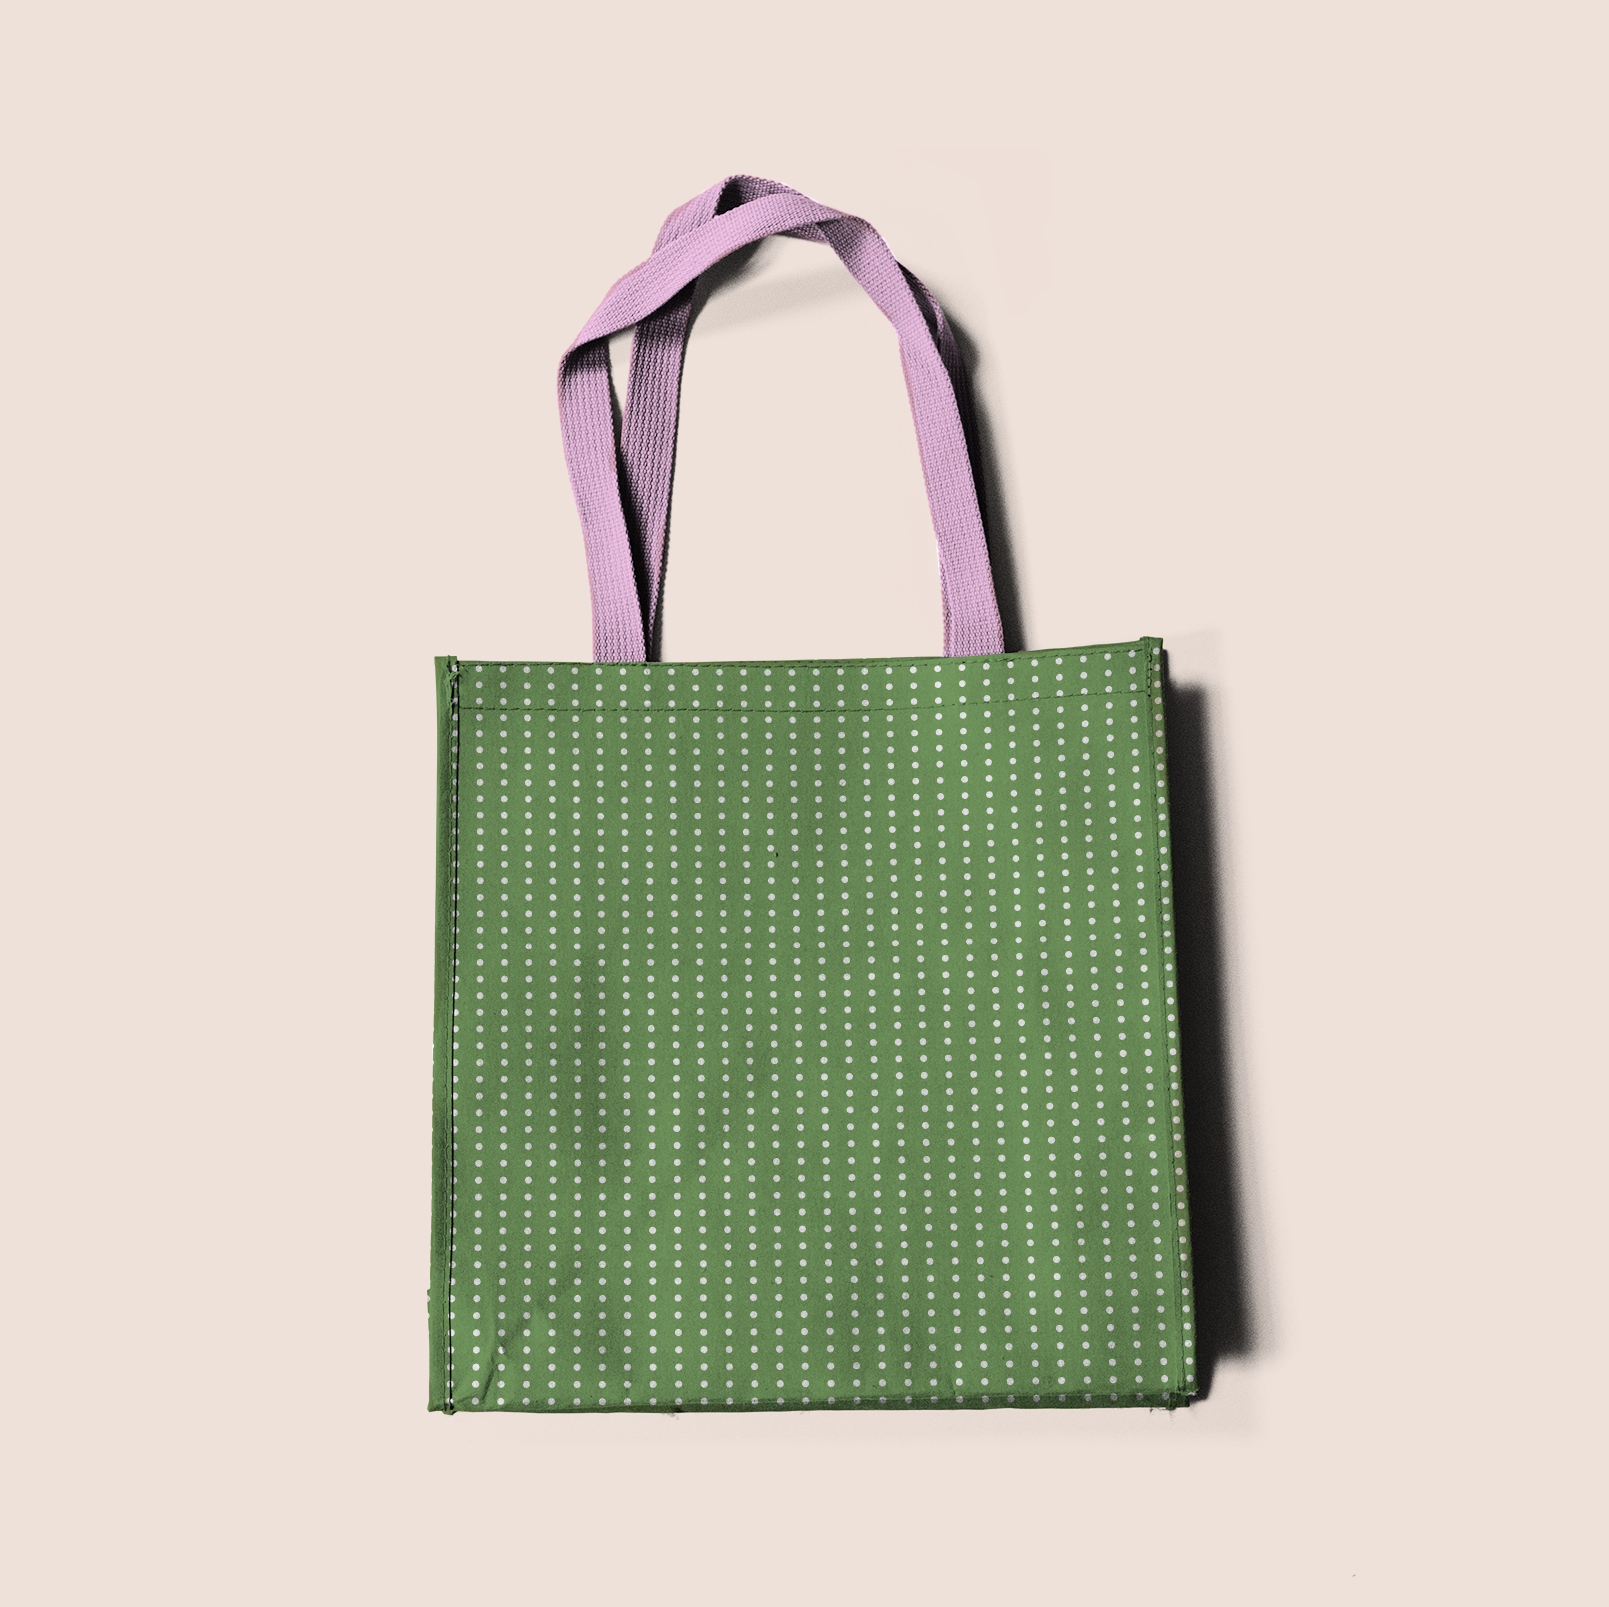 Aligned dots in green pattern design printed on recycled fabric bag and crafts mockup